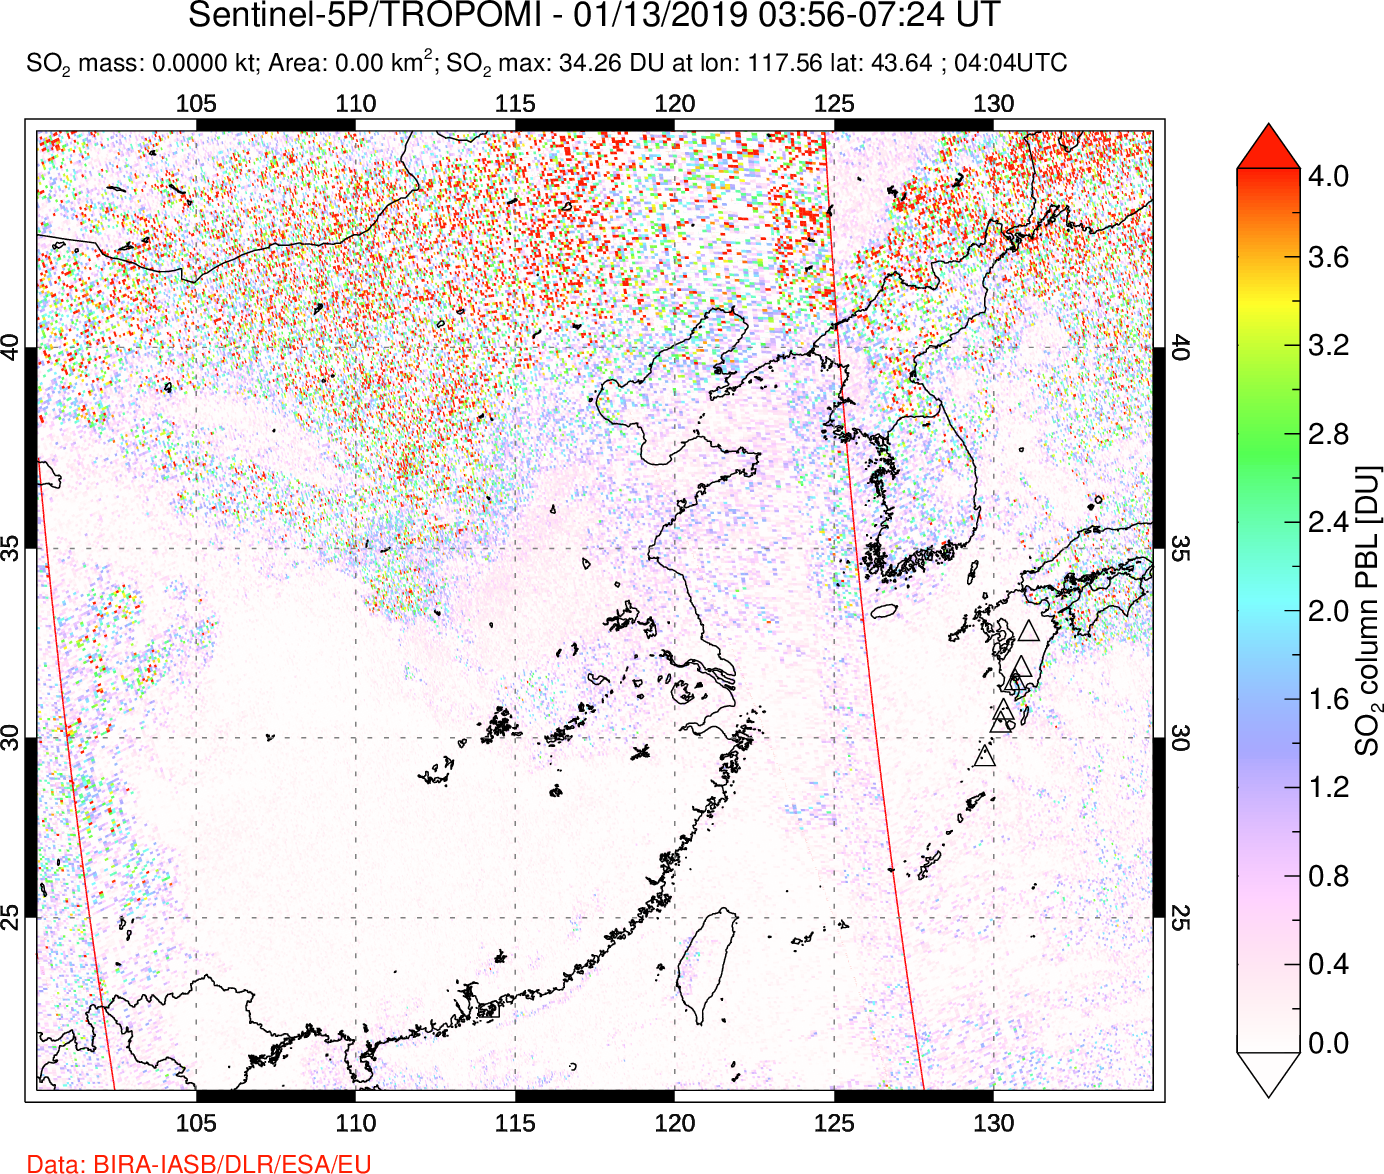 A sulfur dioxide image over Eastern China on Jan 13, 2019.